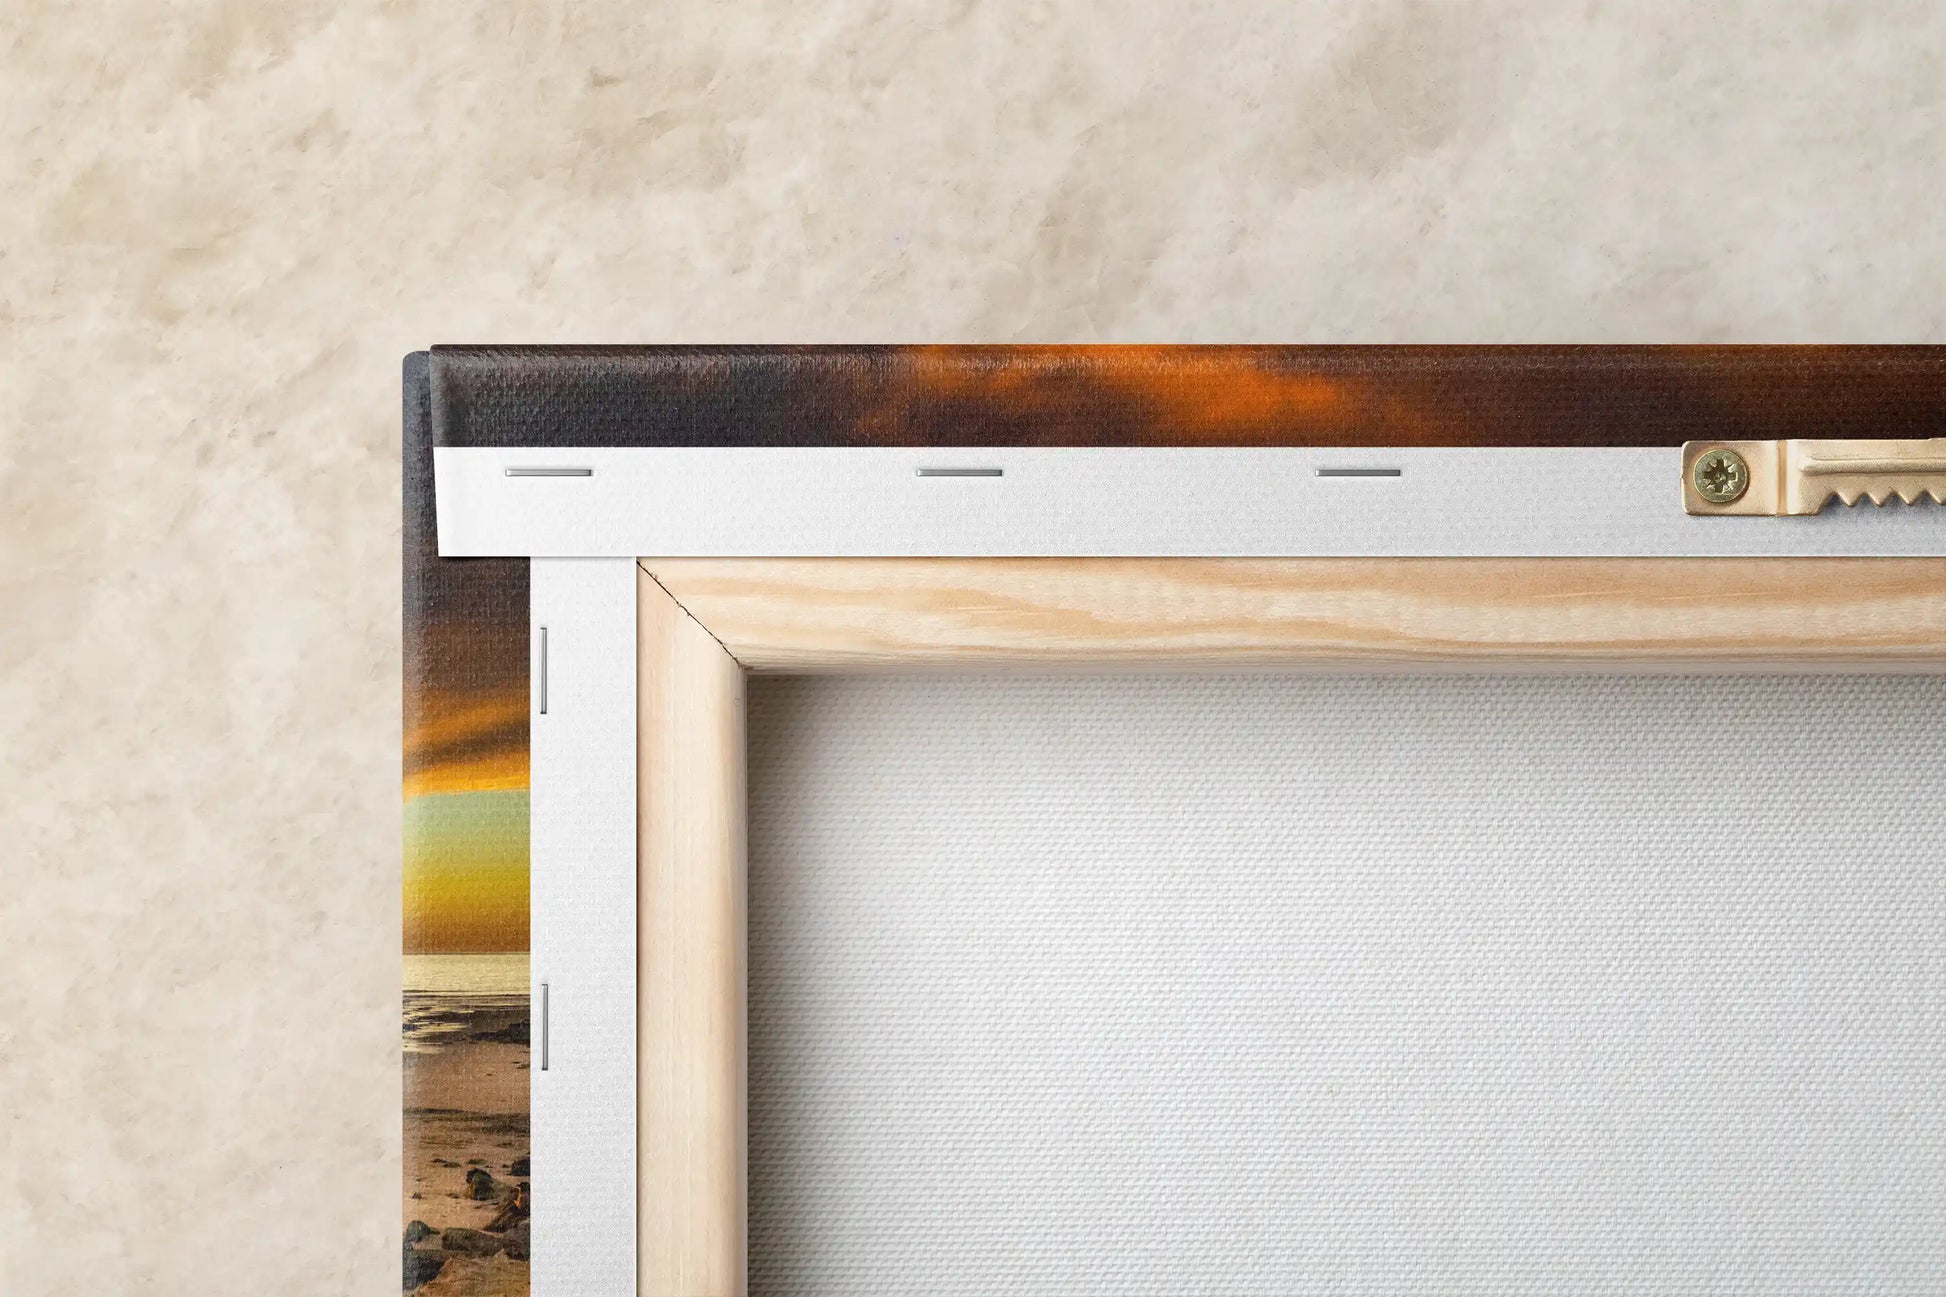 Back view of a canvas print showing sturdy framing and craftsmanship, a promise of enduring beauty with a Hobson Beach sunset scene.